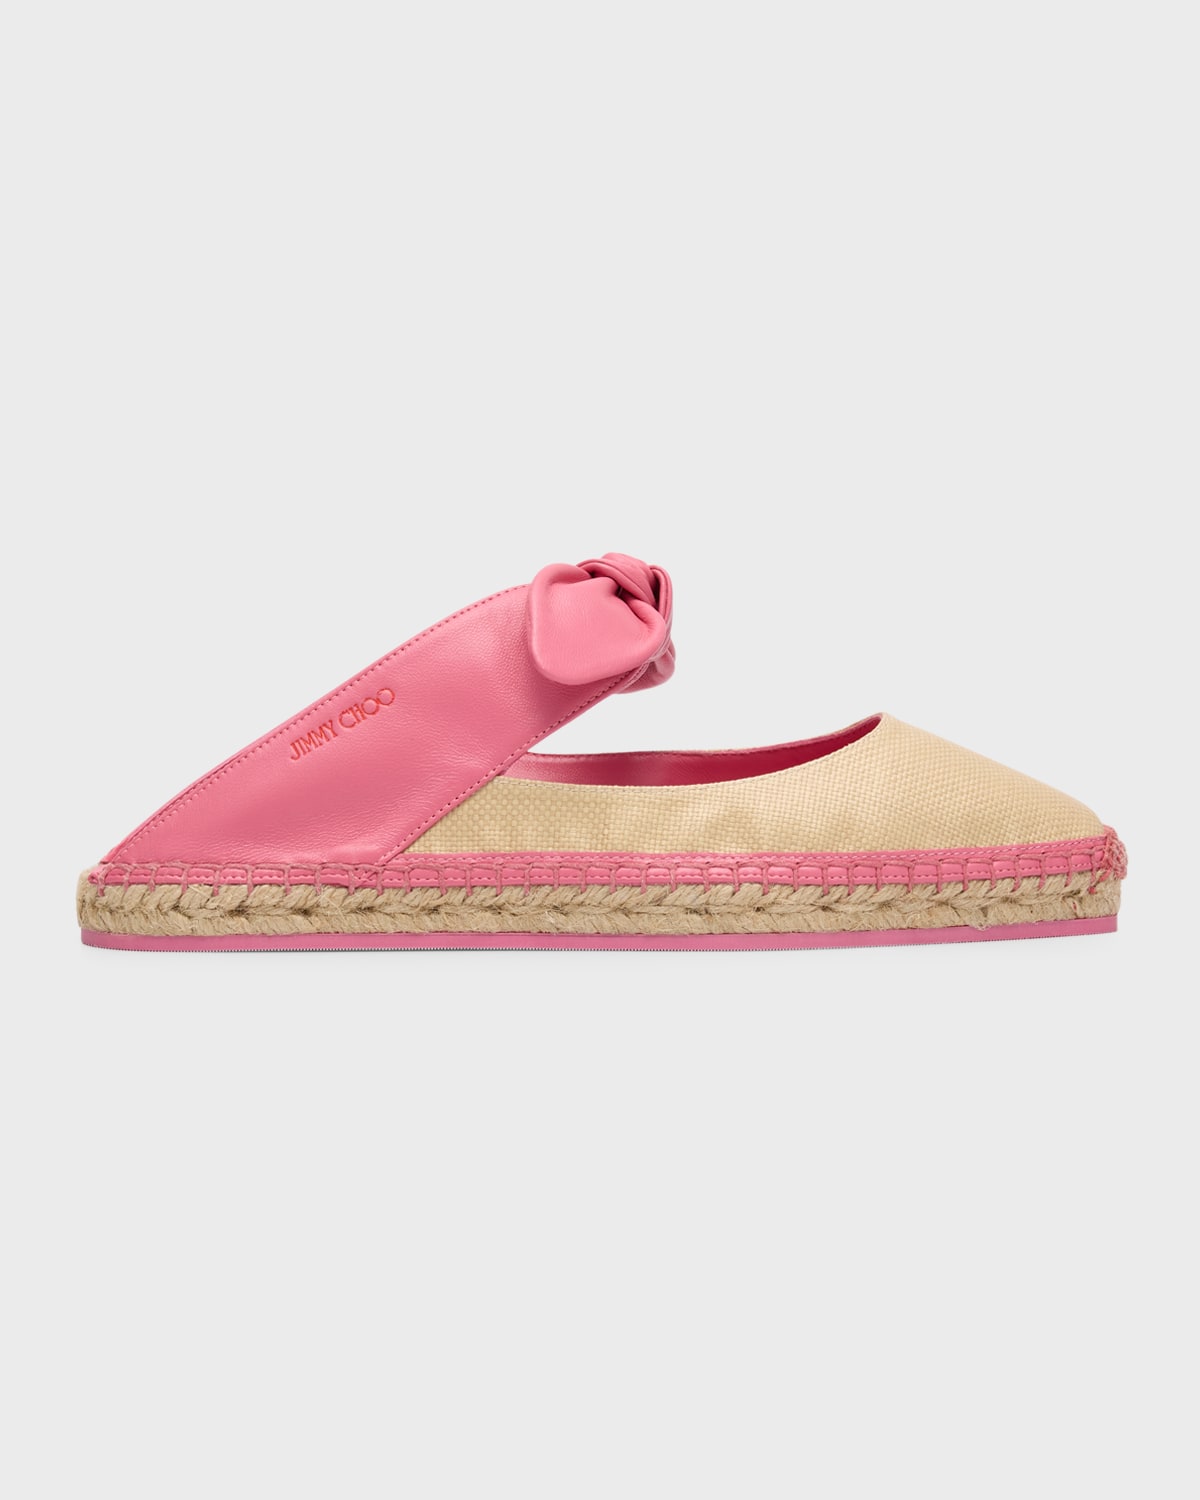 JIMMY CHOO REKA KNOTTED BOW ESPADRILLE MULES